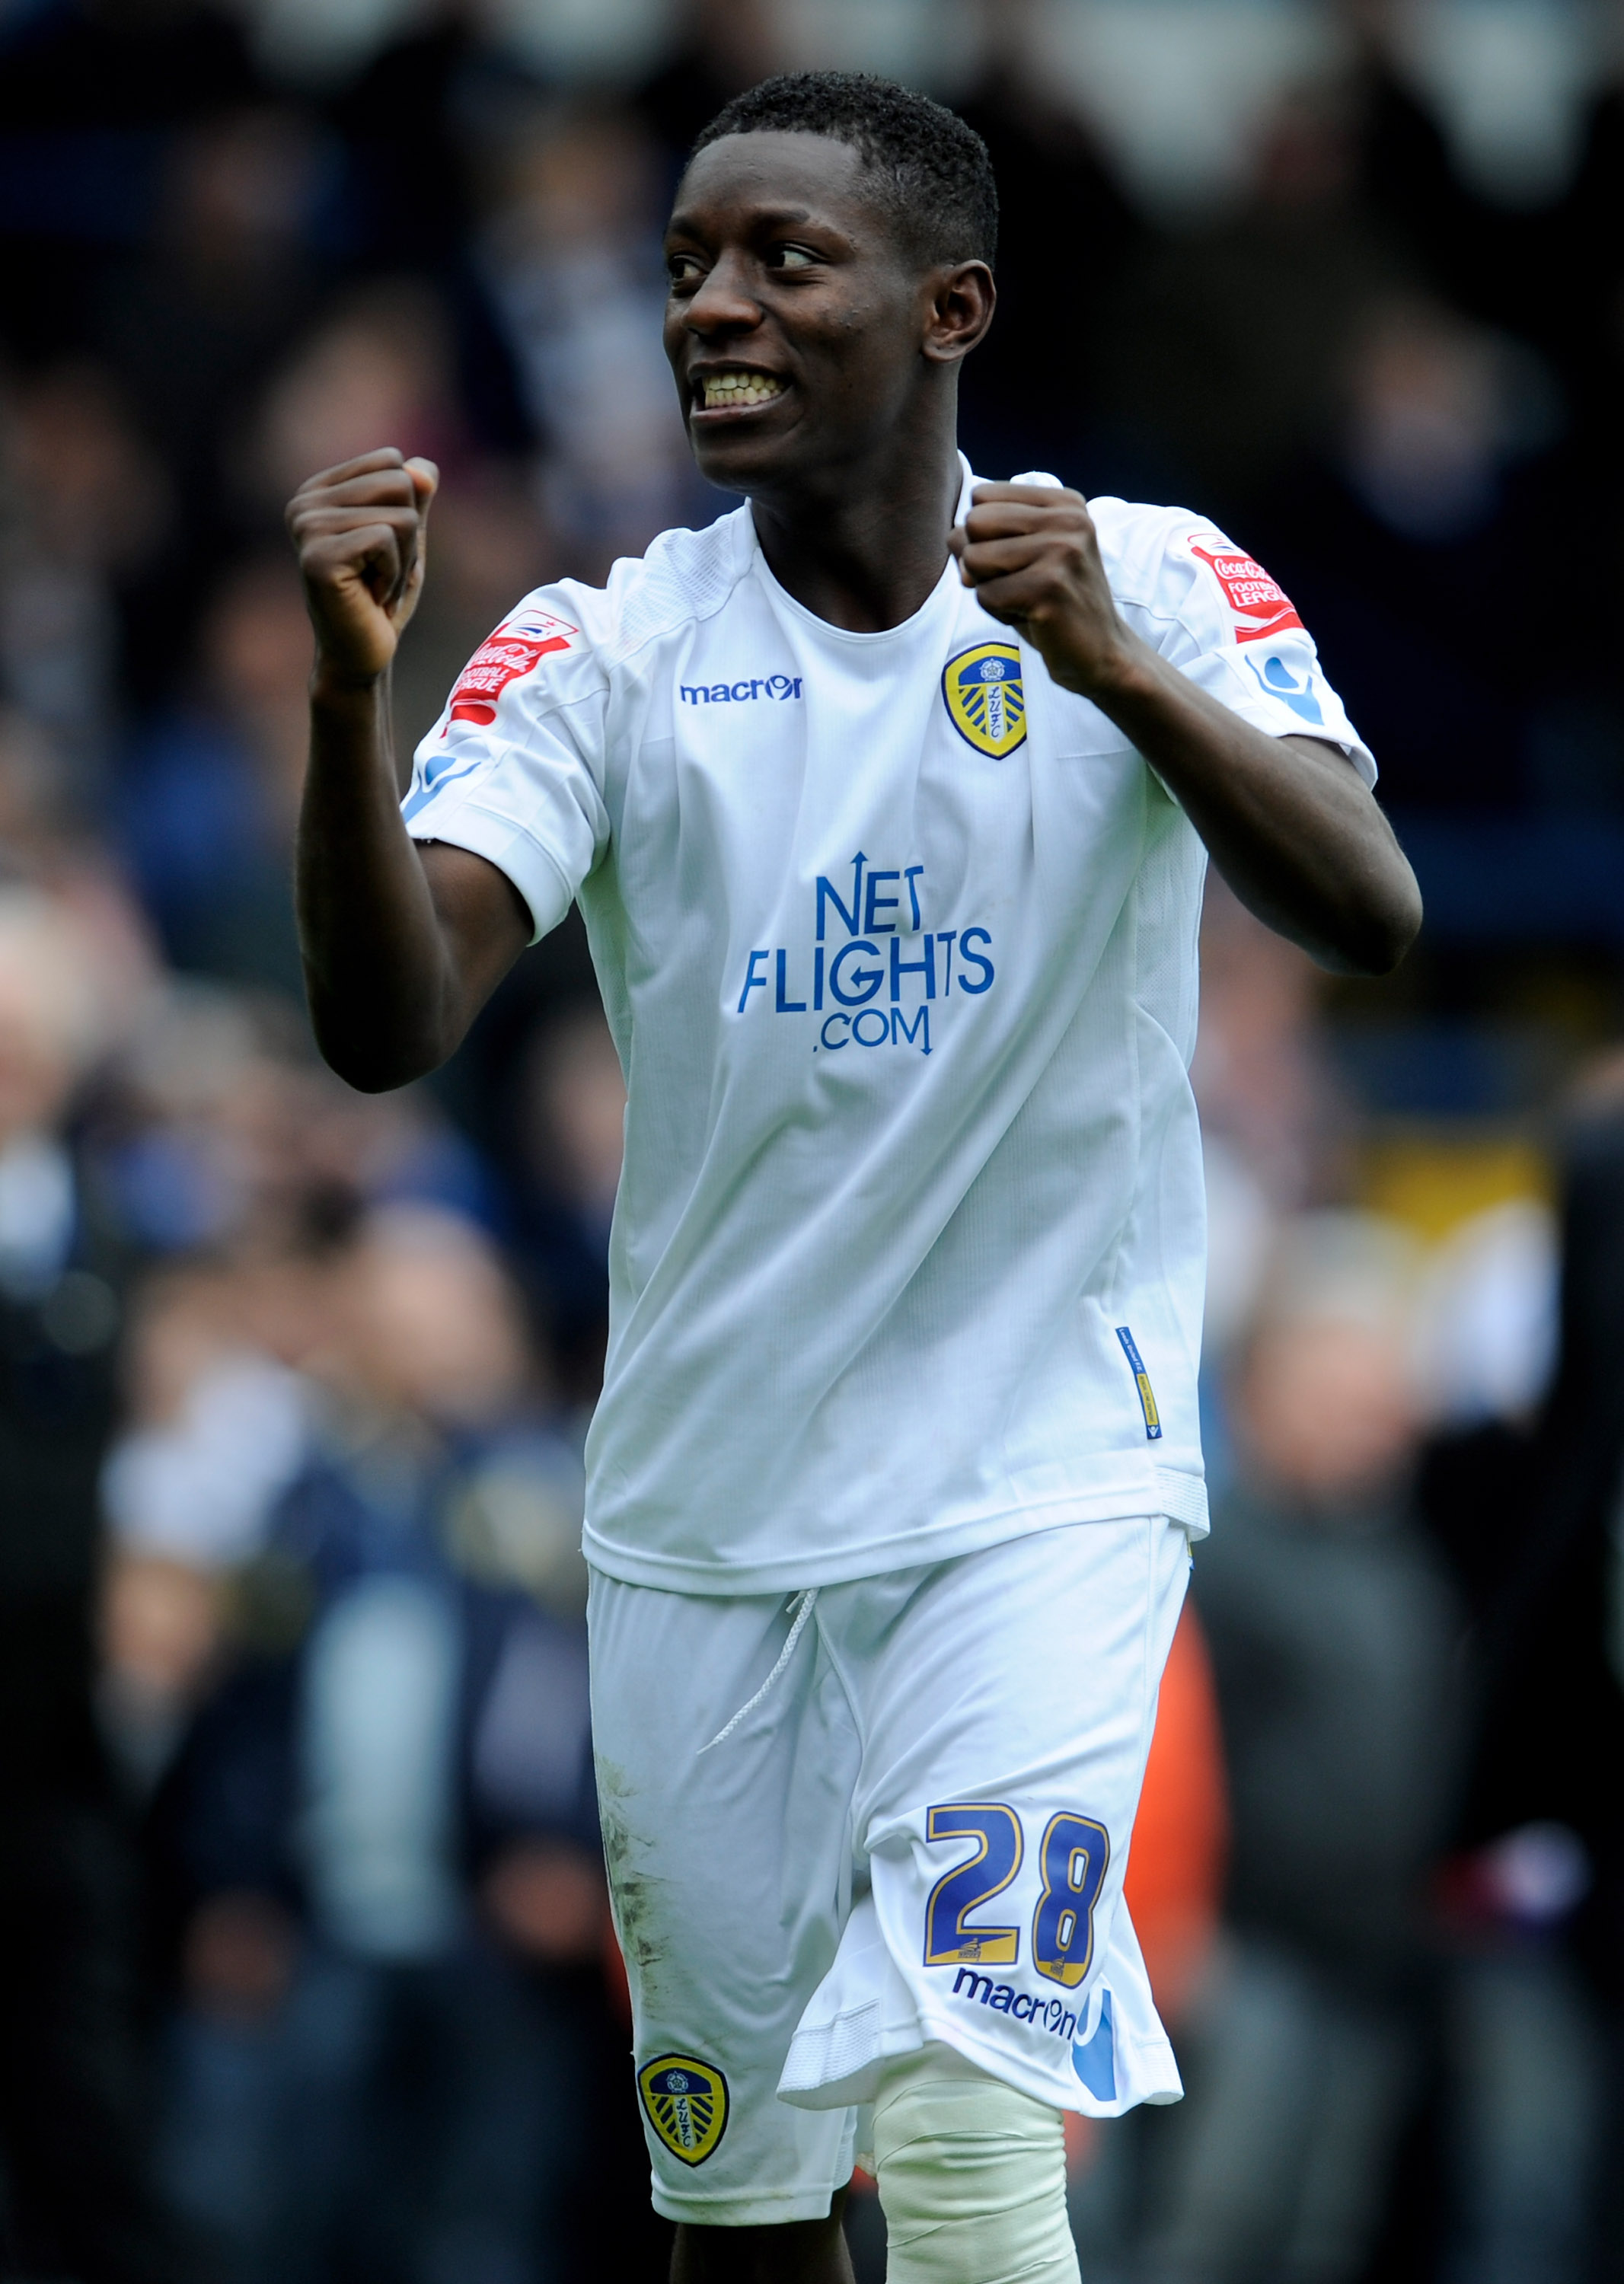 LEEDS, ENGLAND - MAY 08: Max Gradel of Leeds celebrates after the Coca Cola League One match between Leeds United and Bristol Rovers at Elland Road on May 8, 2010 in Leeds, England.  (Photo by Michael Regan/Getty Images)